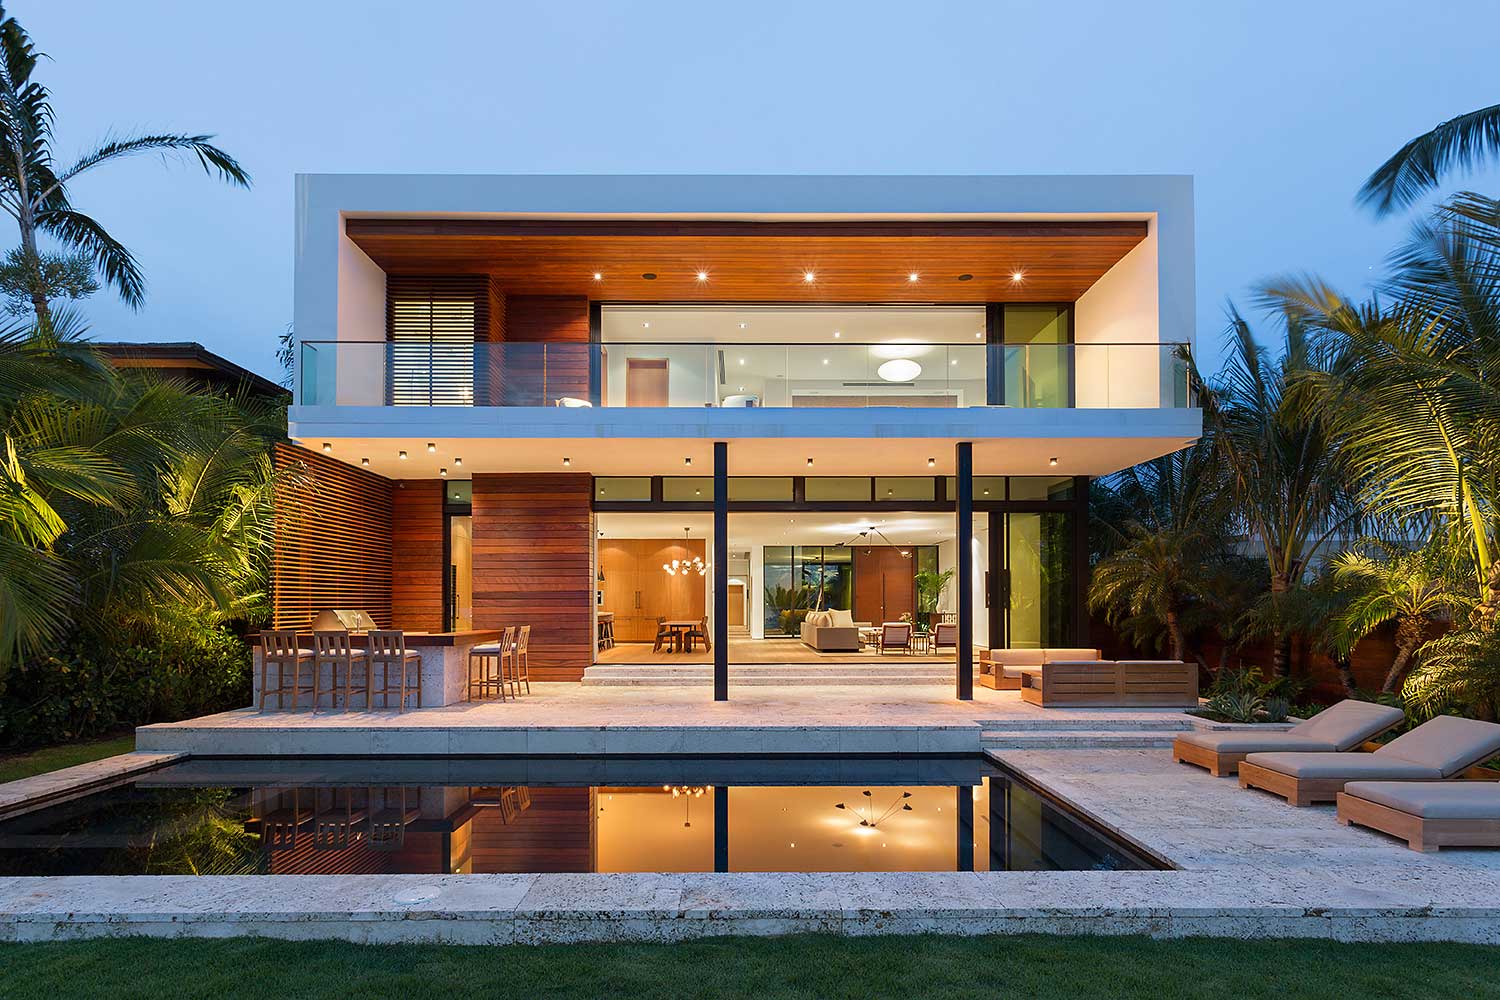 West San Marino Residence by Strang Architecture 